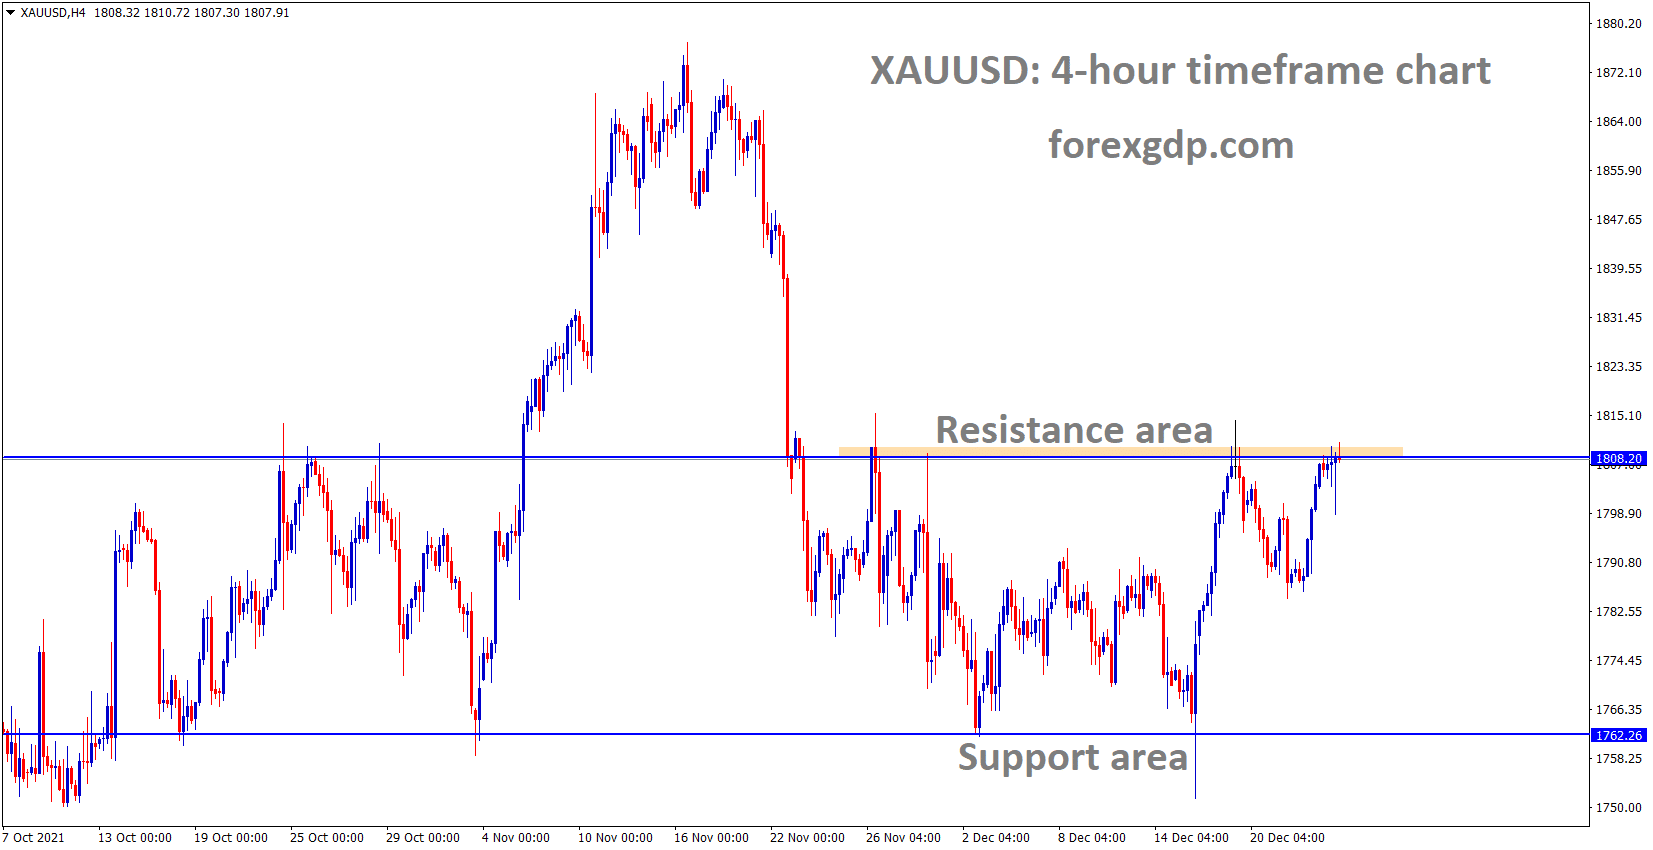 XAUUSD Gold price has reached the Horizontal resistance area of the Box Pattern.